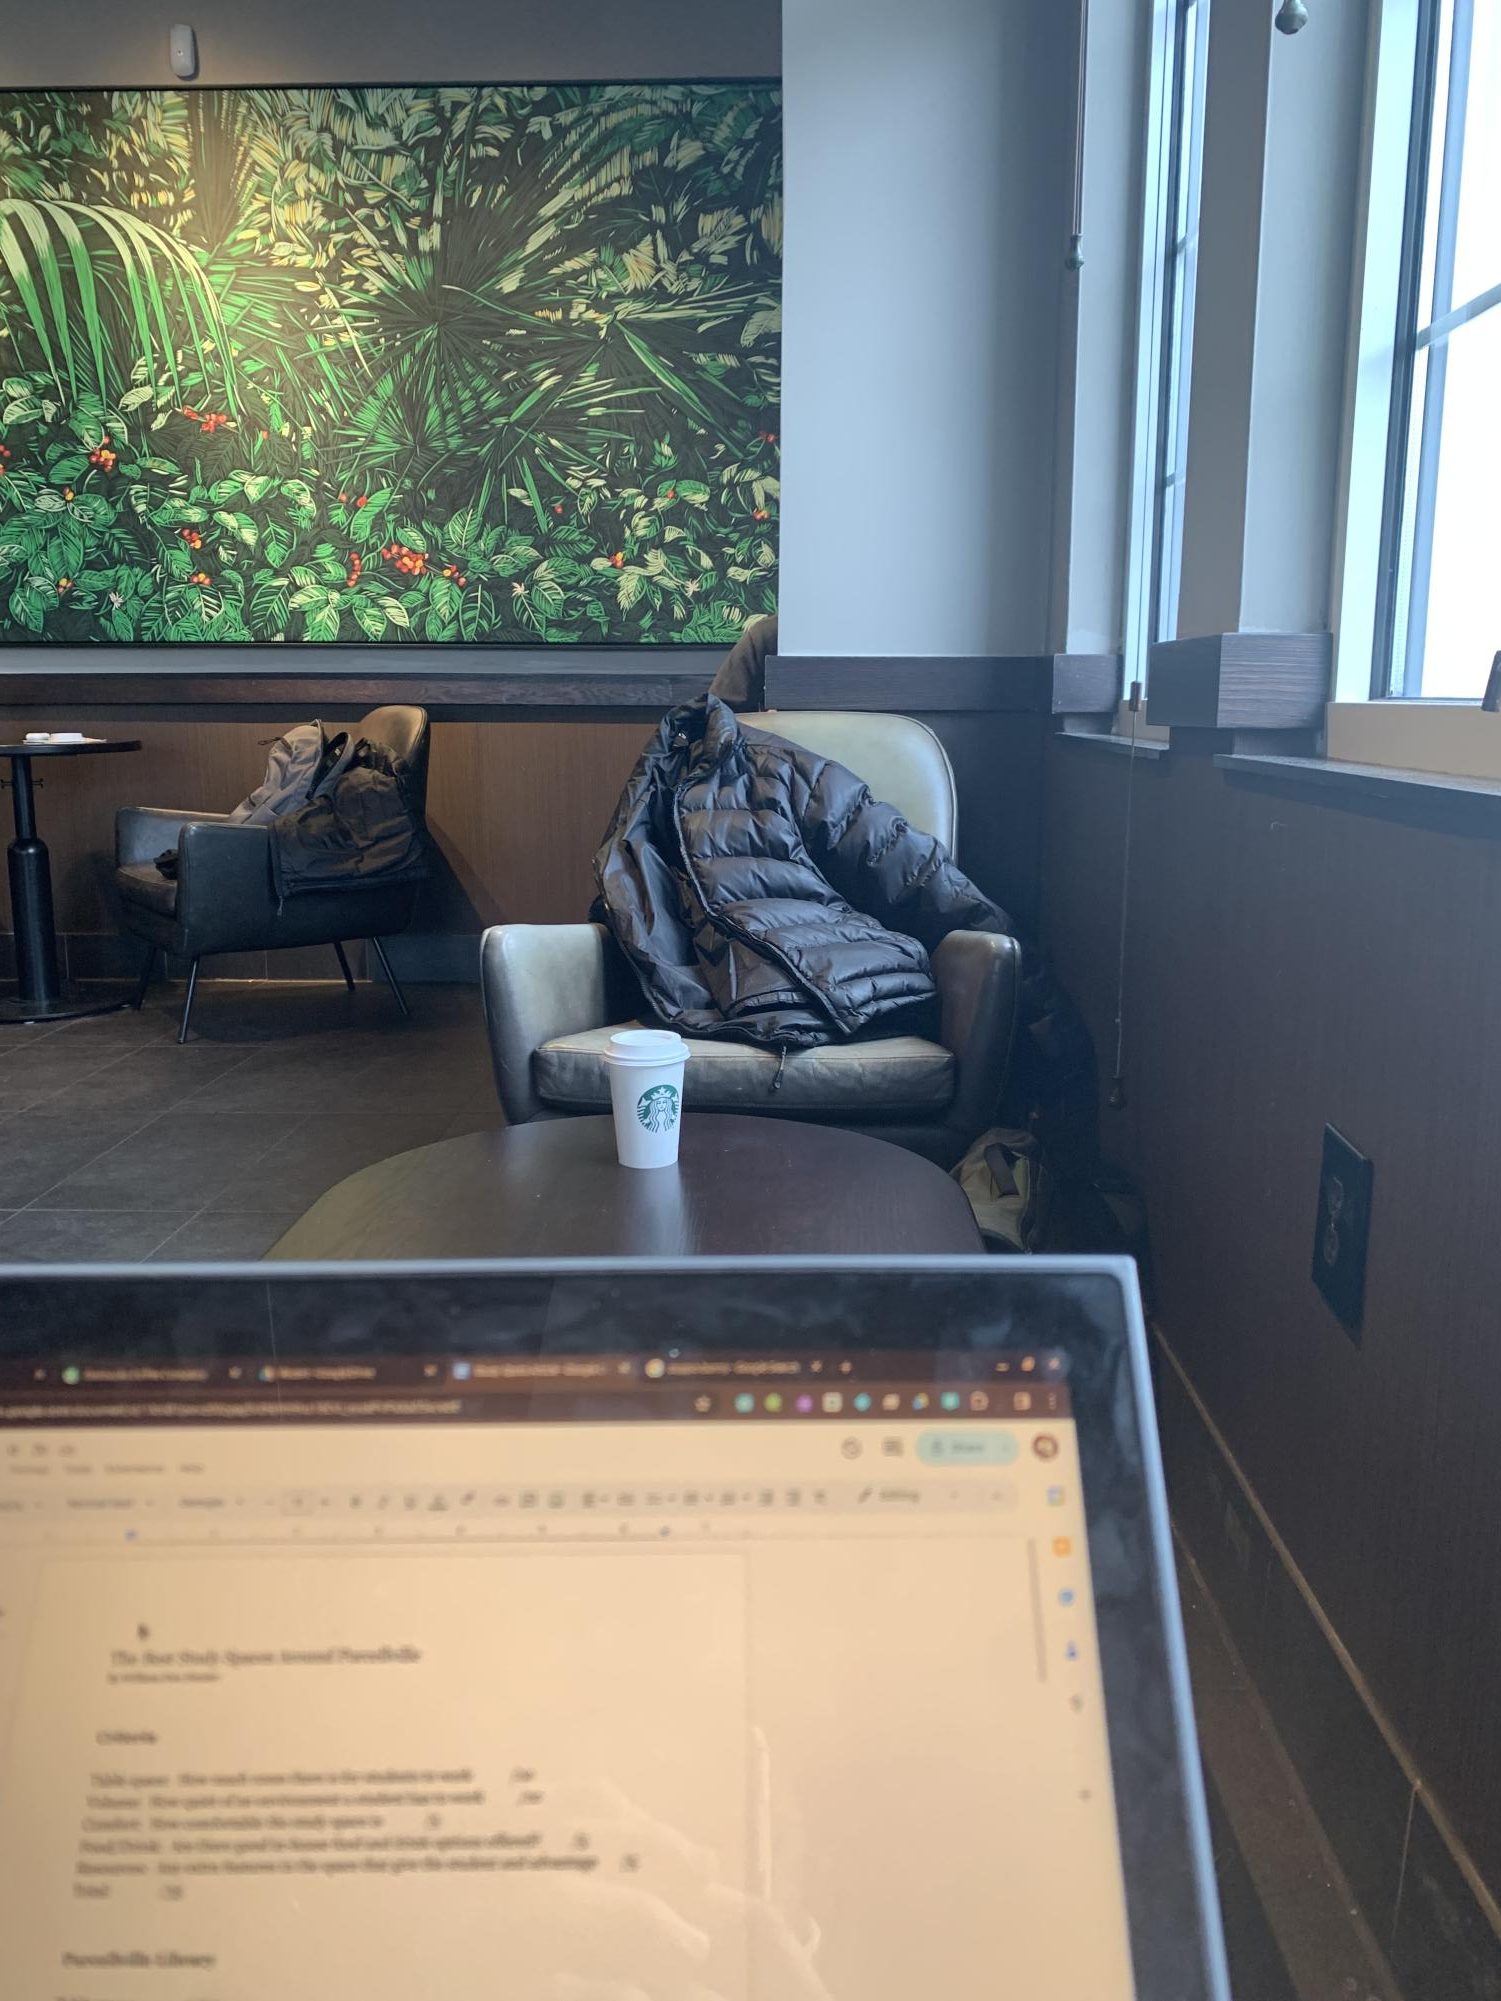  A first person view of William Den Herder writing his review of Starbucks as a study spot while at Starbucks. Photo provided by William Den Herder.